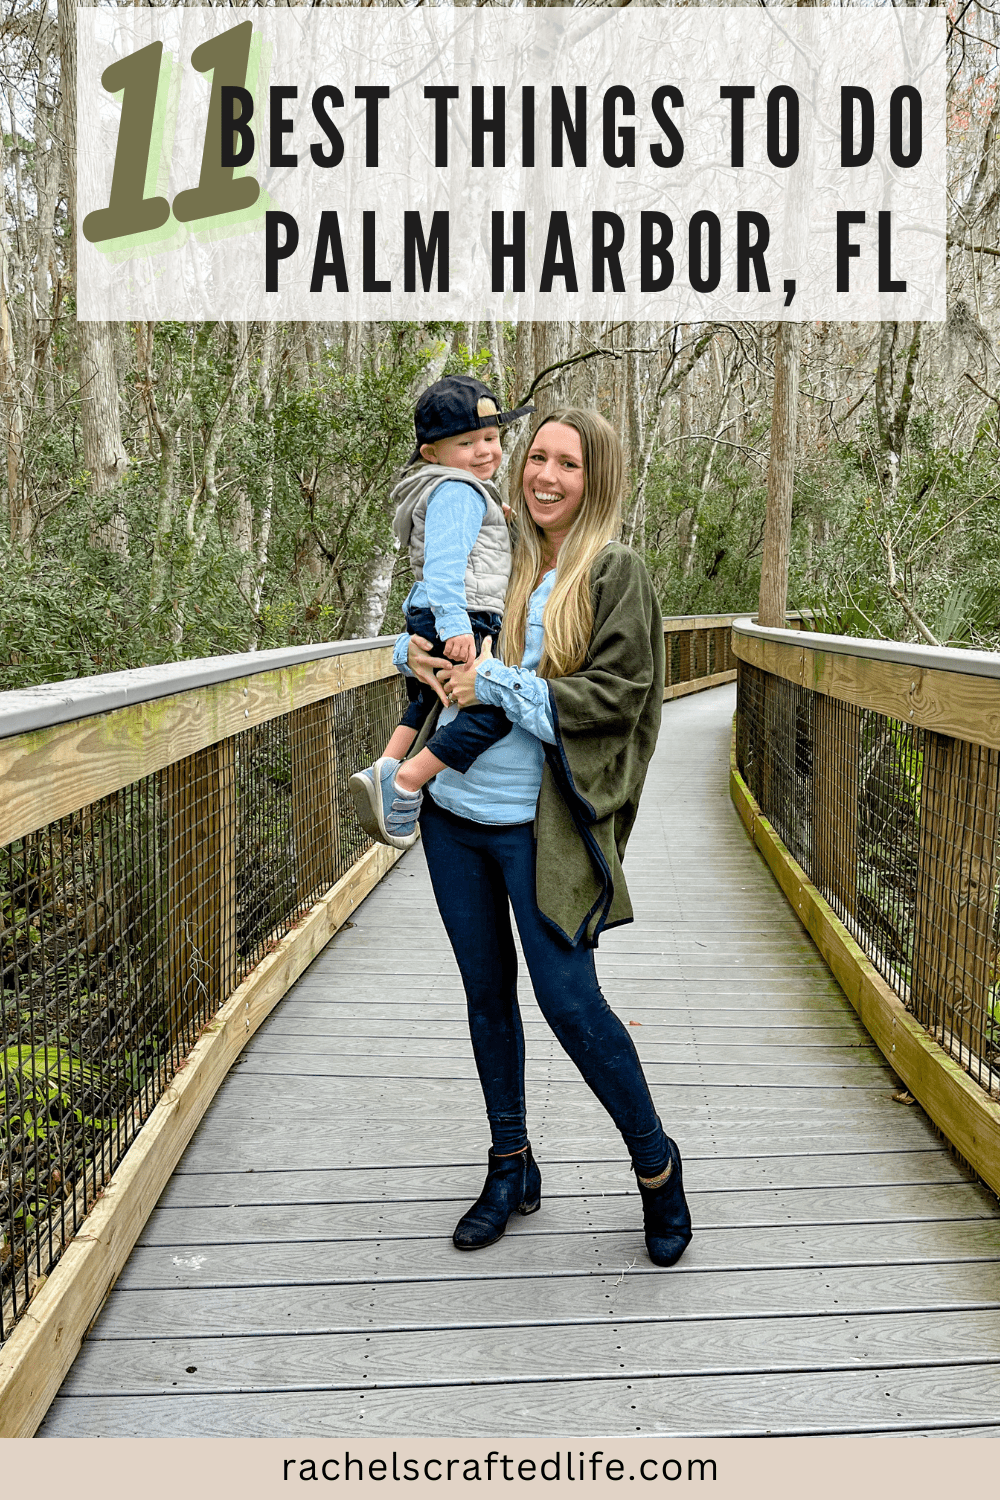 11 Best Things to Do in Palm Harbor, FL Rachel's Crafted Life